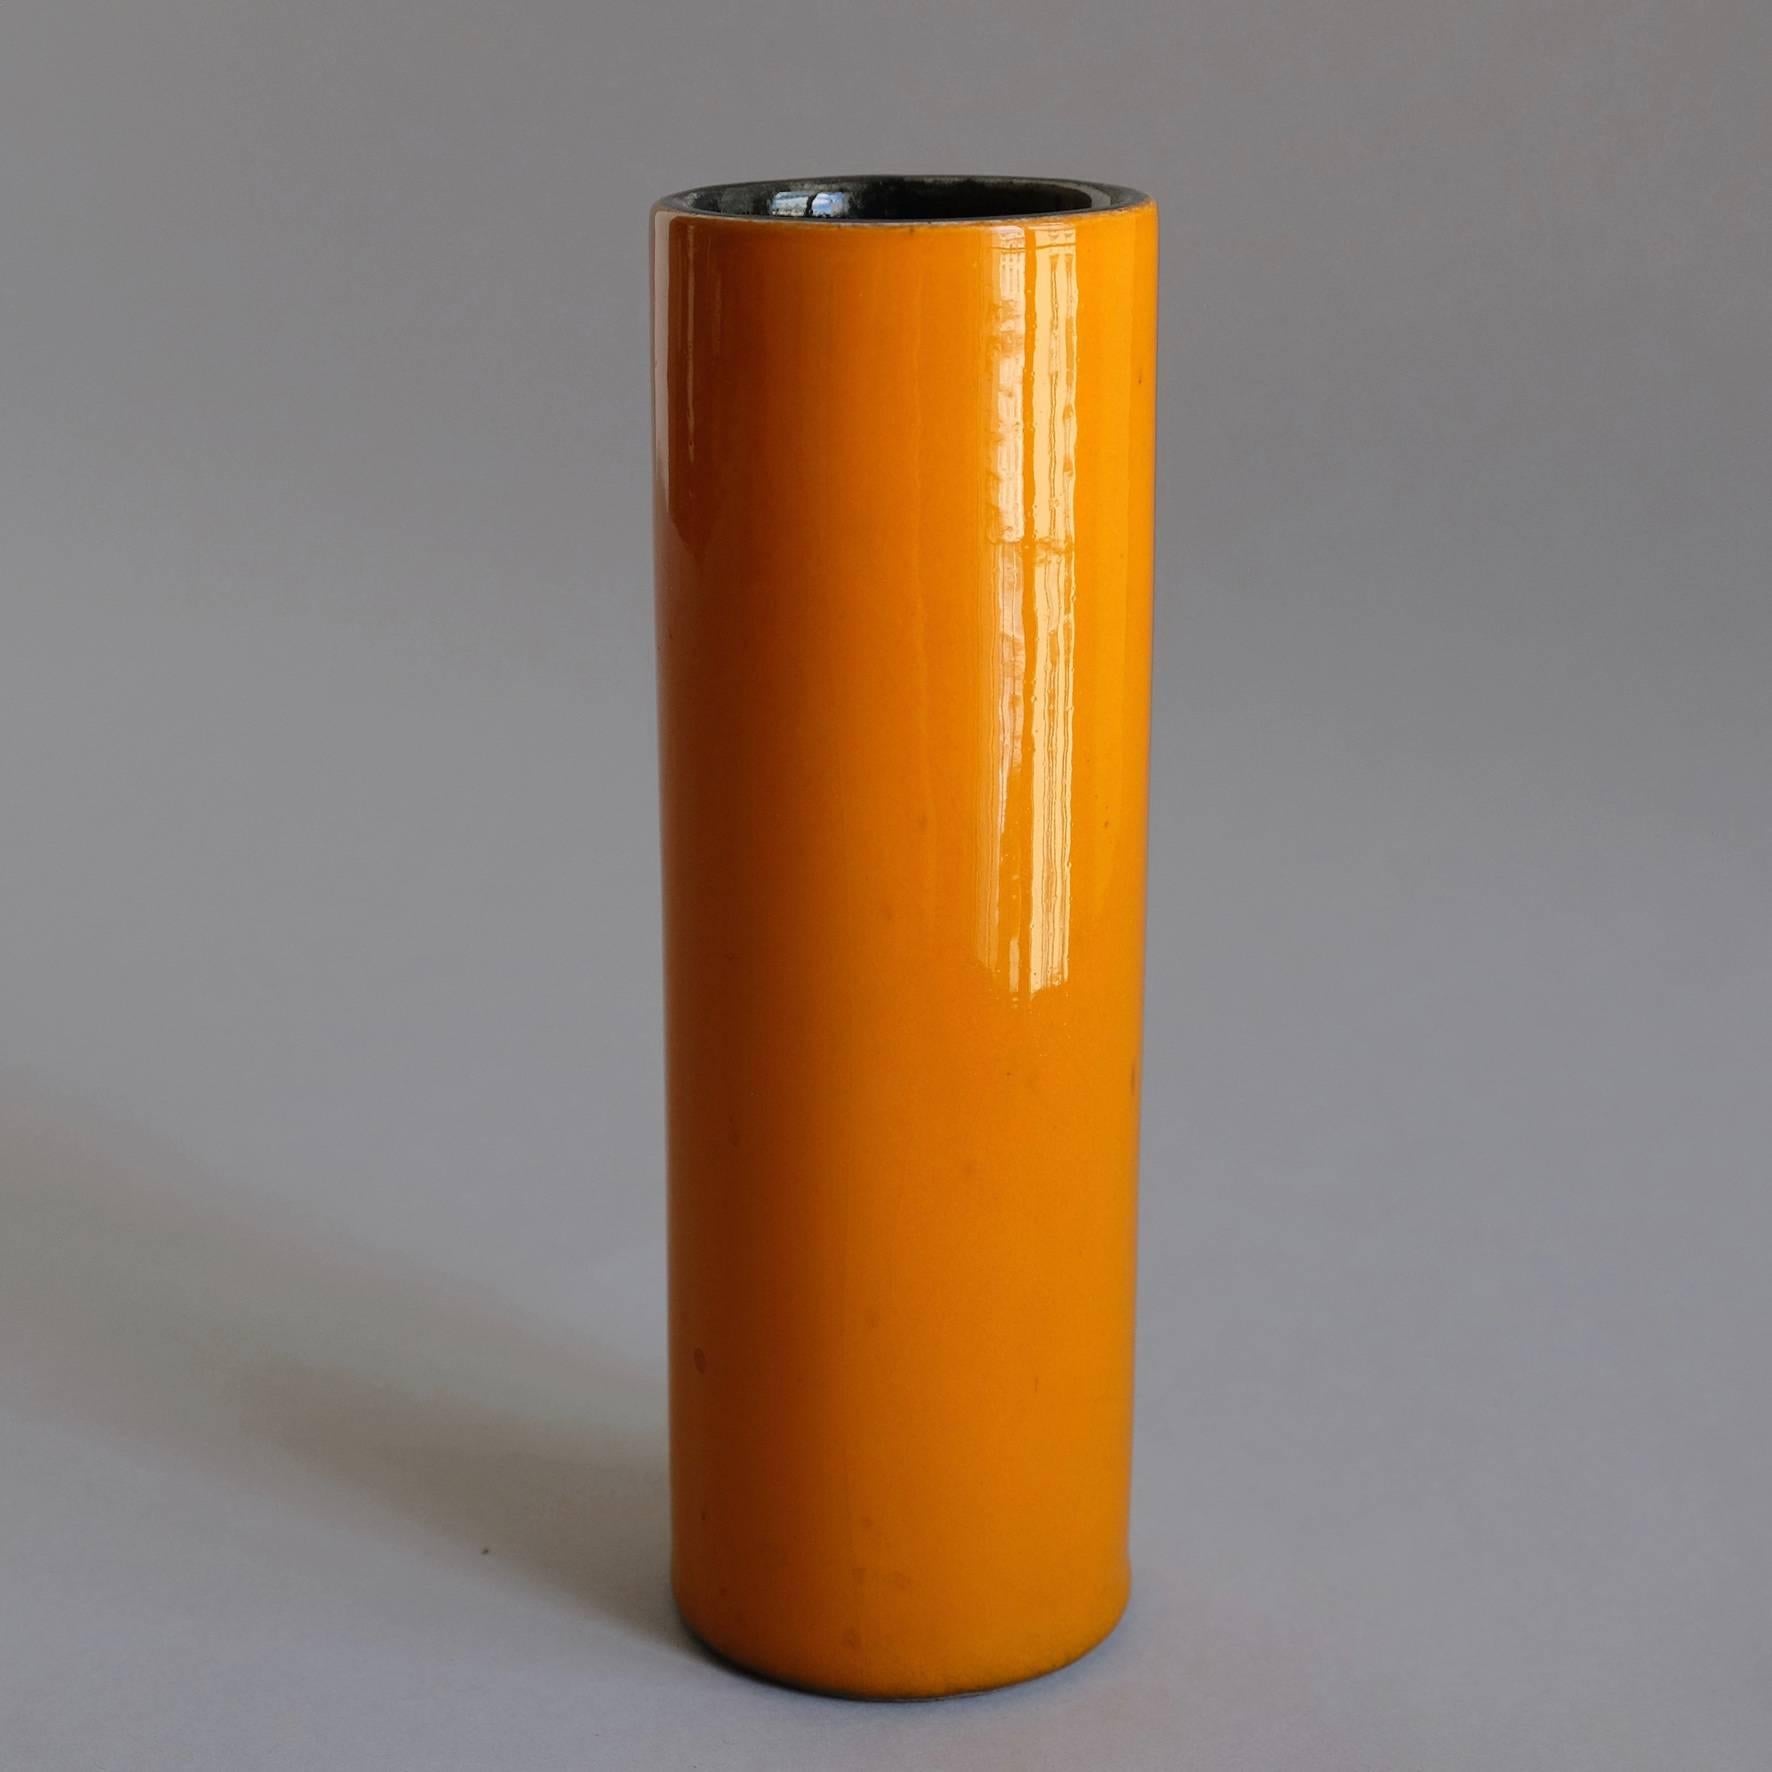 An orange glazed ceramic cylindrical vase, with a black covered interior.
Signed underneath 